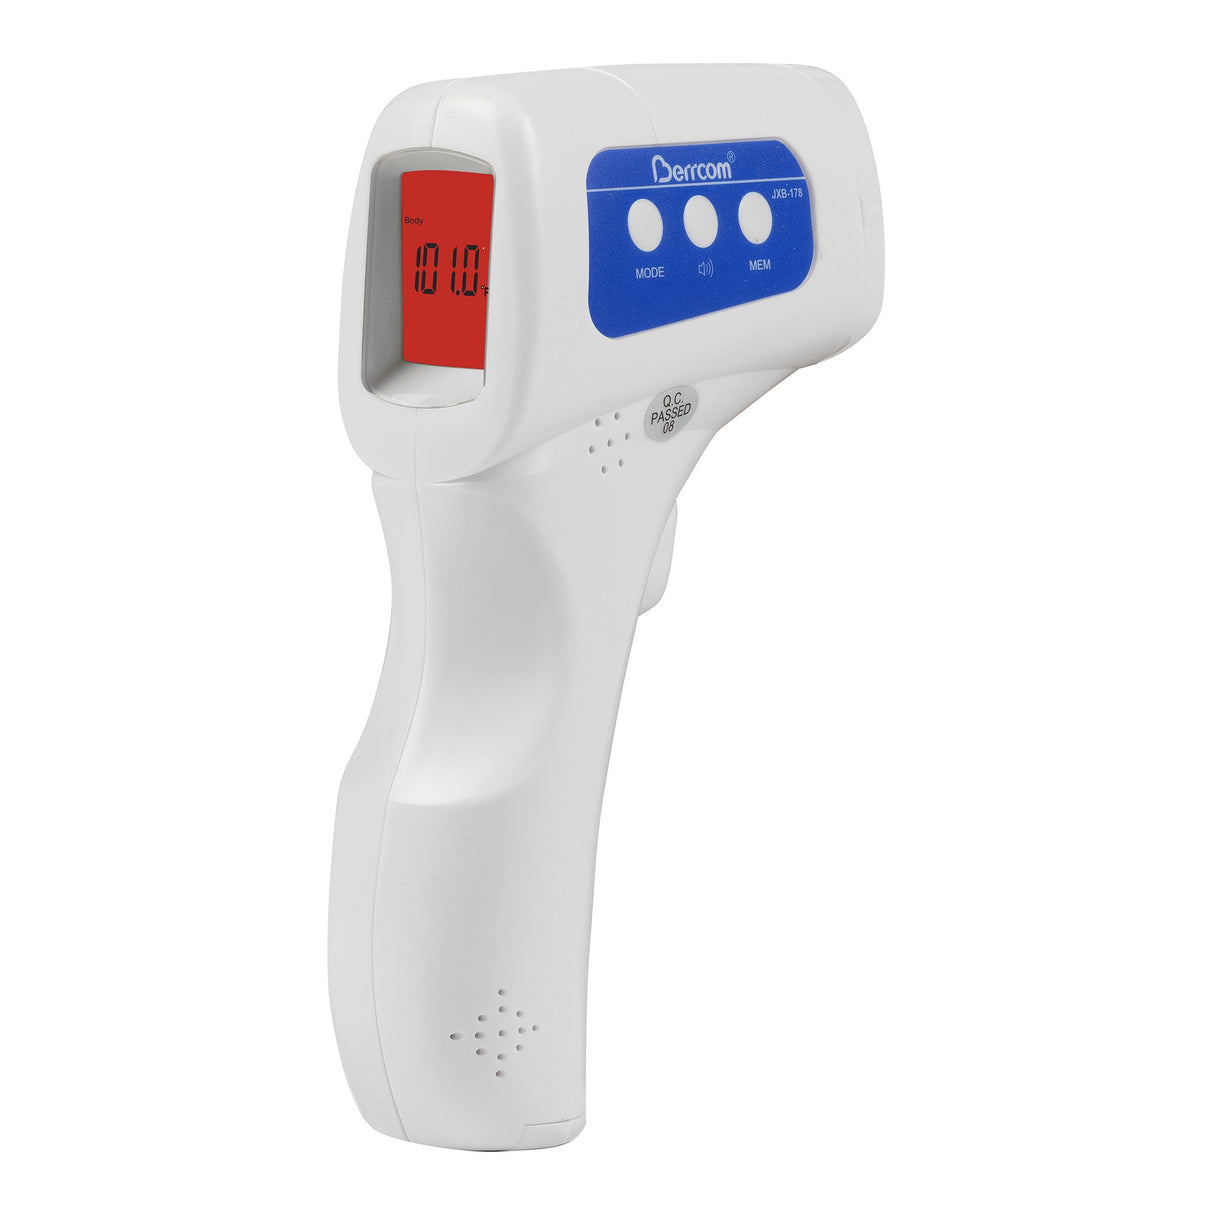 THERMOMETER, INFRARED BERRCOM N/CONTACT (50/CS)